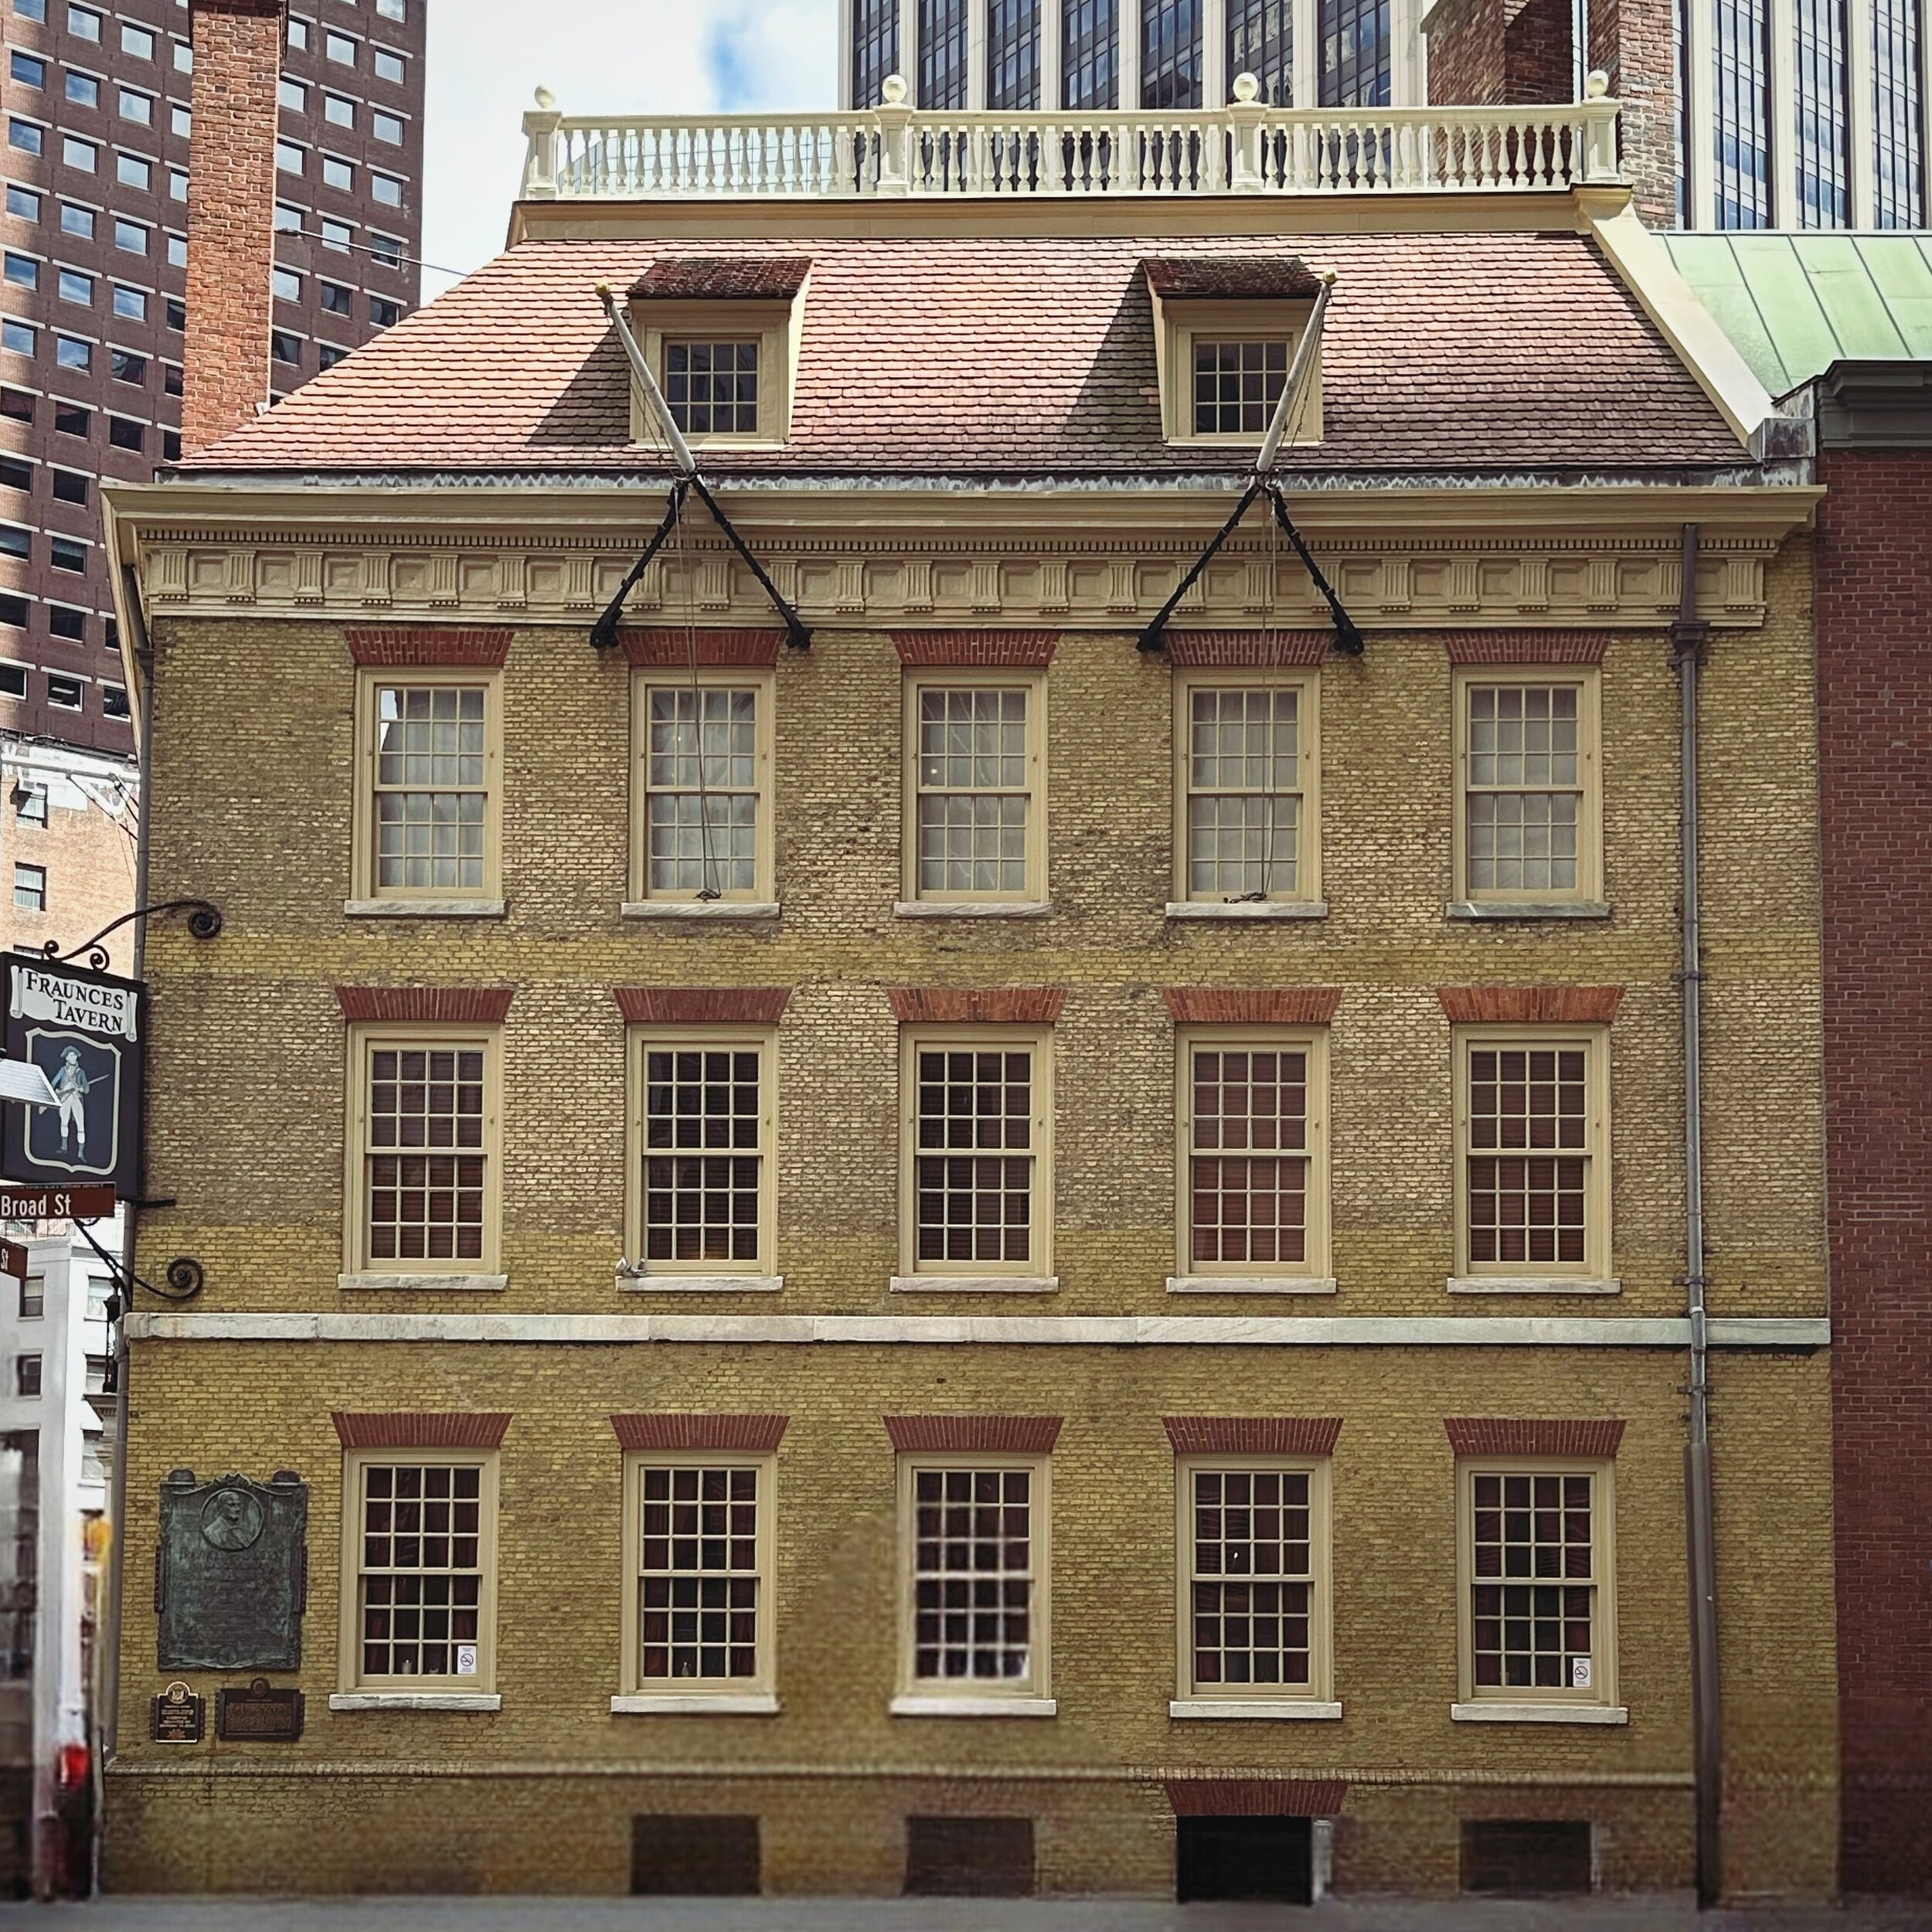 Good Sunday morning. We had a great visit at the Fraunces Tavern in New York City. We will be sharing more on this historic tavern in the heart of the financial district. So much history!
Sheila
#tavernsofamerica #history #revolution #georgianarchite